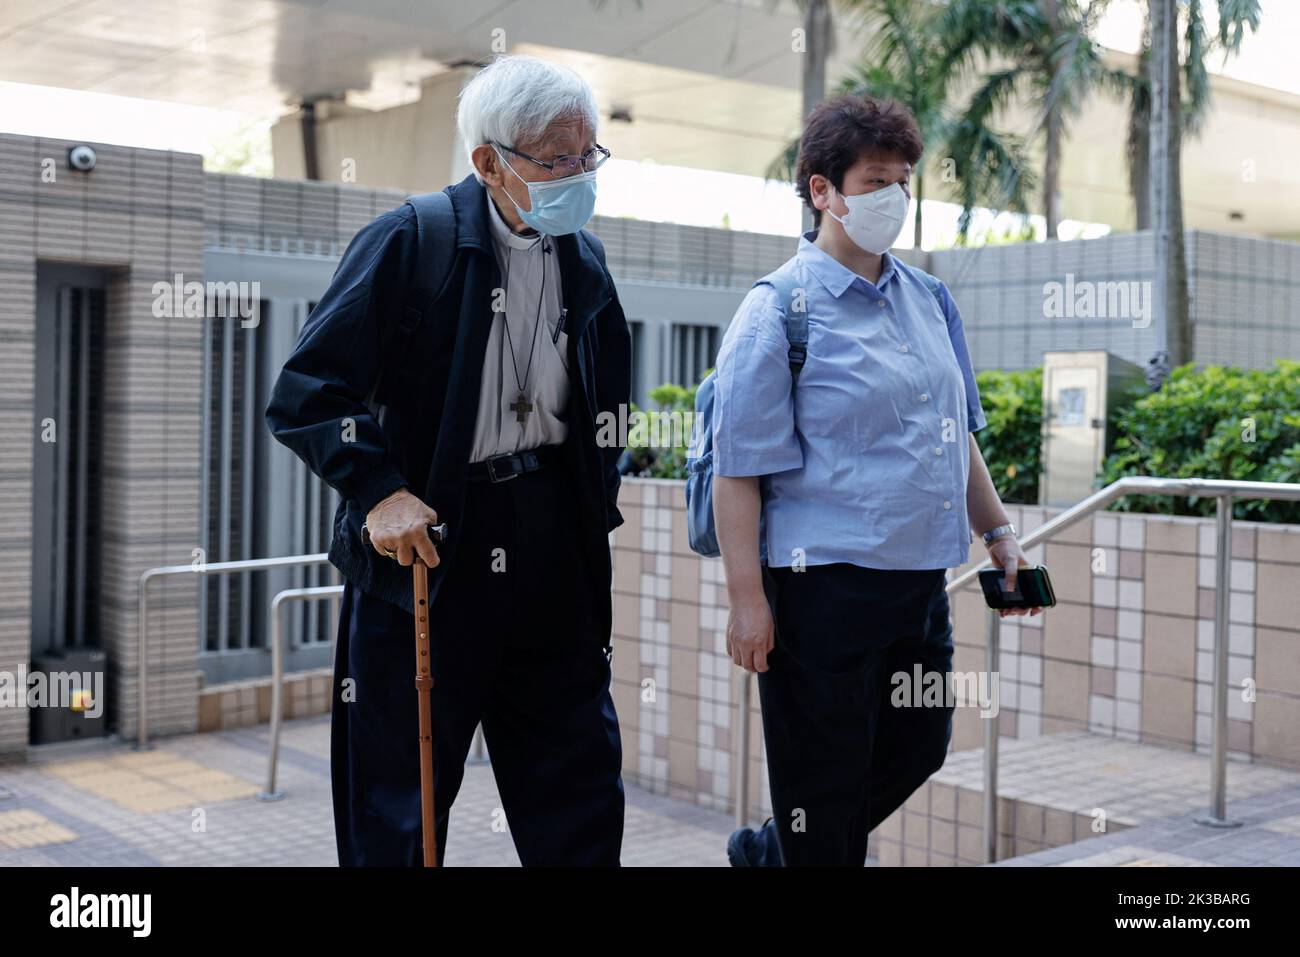 Retired bishop Cardinal Joseph Zen Ze-kiun arrives at the West Kowloon Magistrates' courts for allegedly failing to register the legal and medical fund that helped those embroiled in the 2019 anti-government protests as a society, in Hong Kong, China September 26, 2022. REUTERS/Tyrone Siu Stock Photo